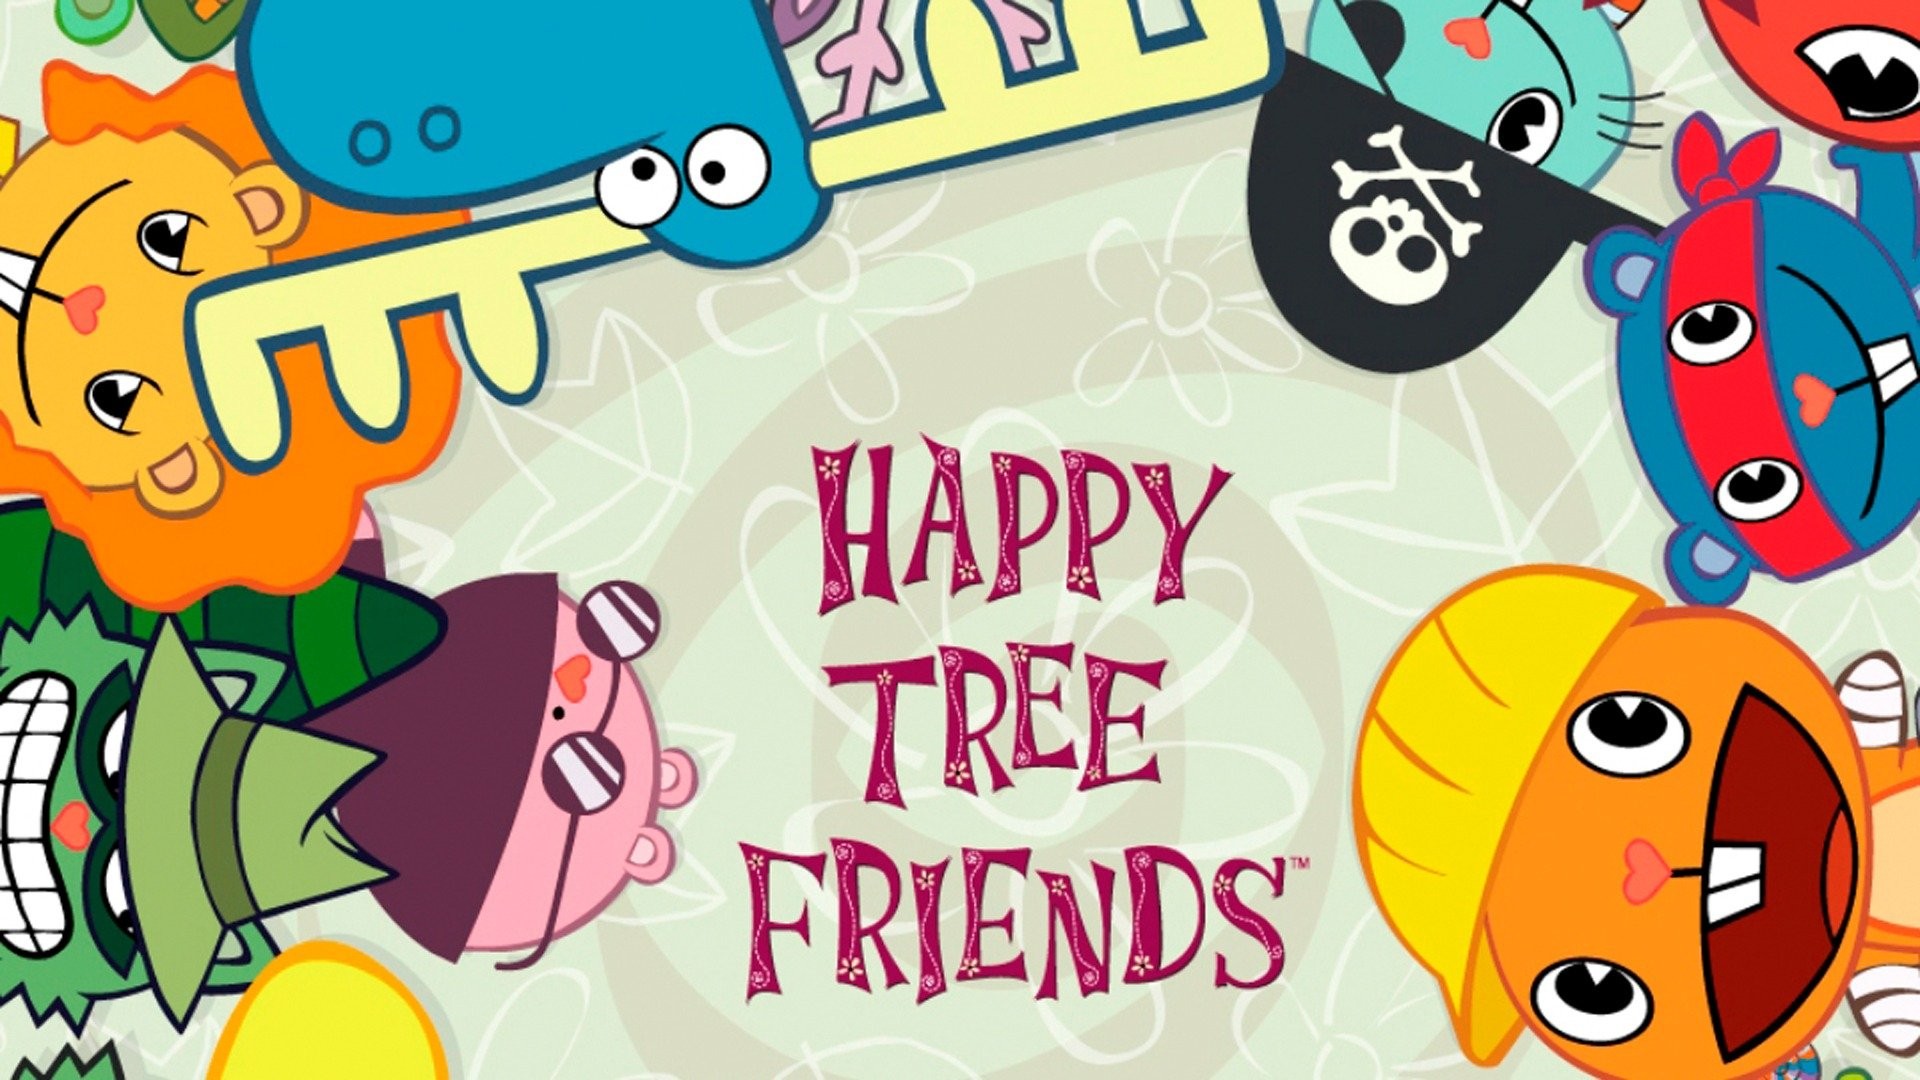 Happy Tree Friends Wallpaper 2 by TheScarecrowOfNorway on DeviantArt